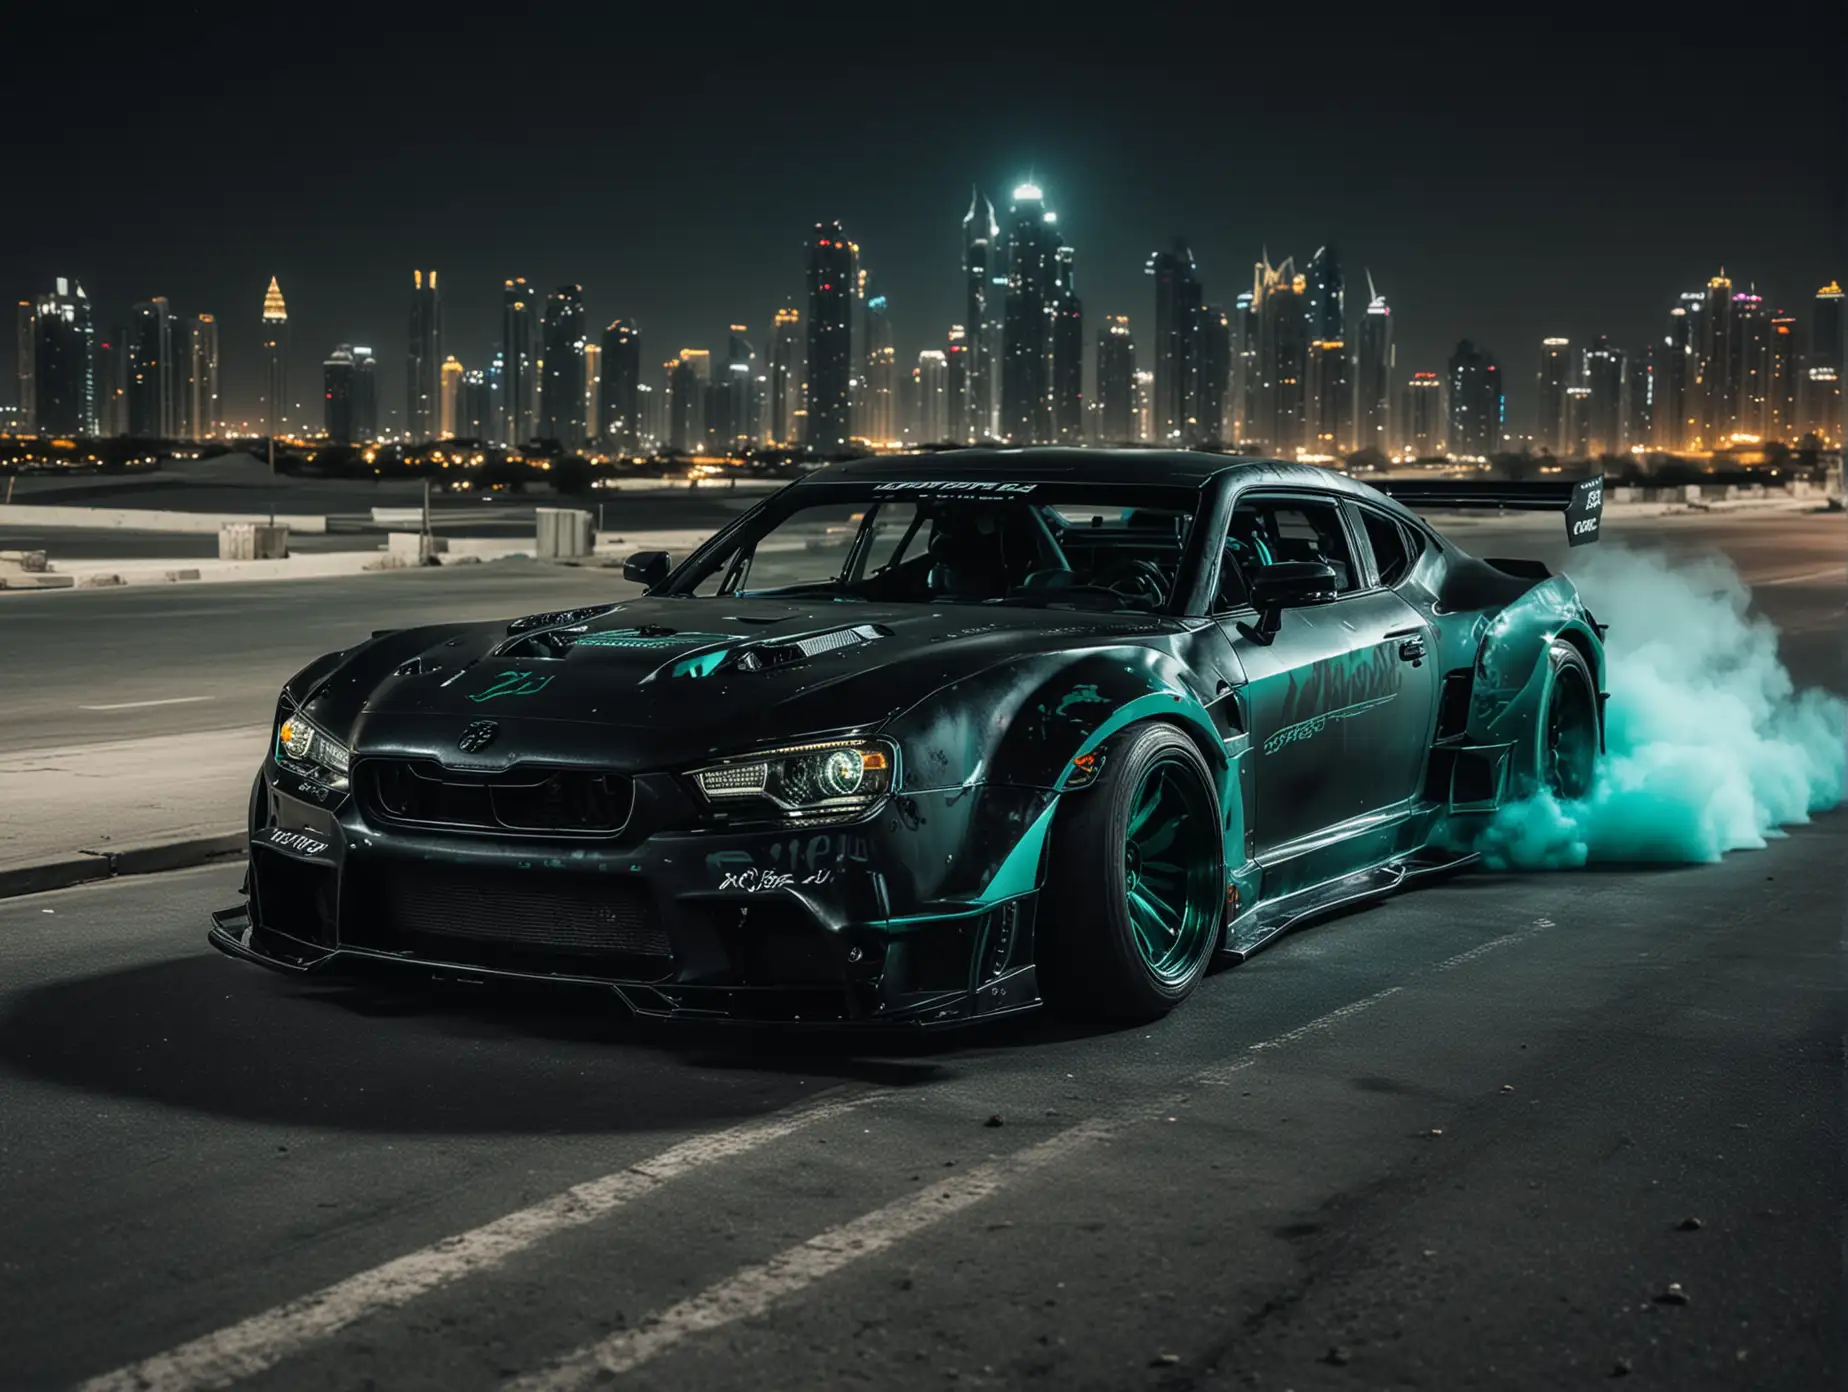 Create creative drifting cars from hulk, evil tuning type, Downhill in the city of dubai drifting at night rear view from high far away,  car color dark carbon black, dark turquoise